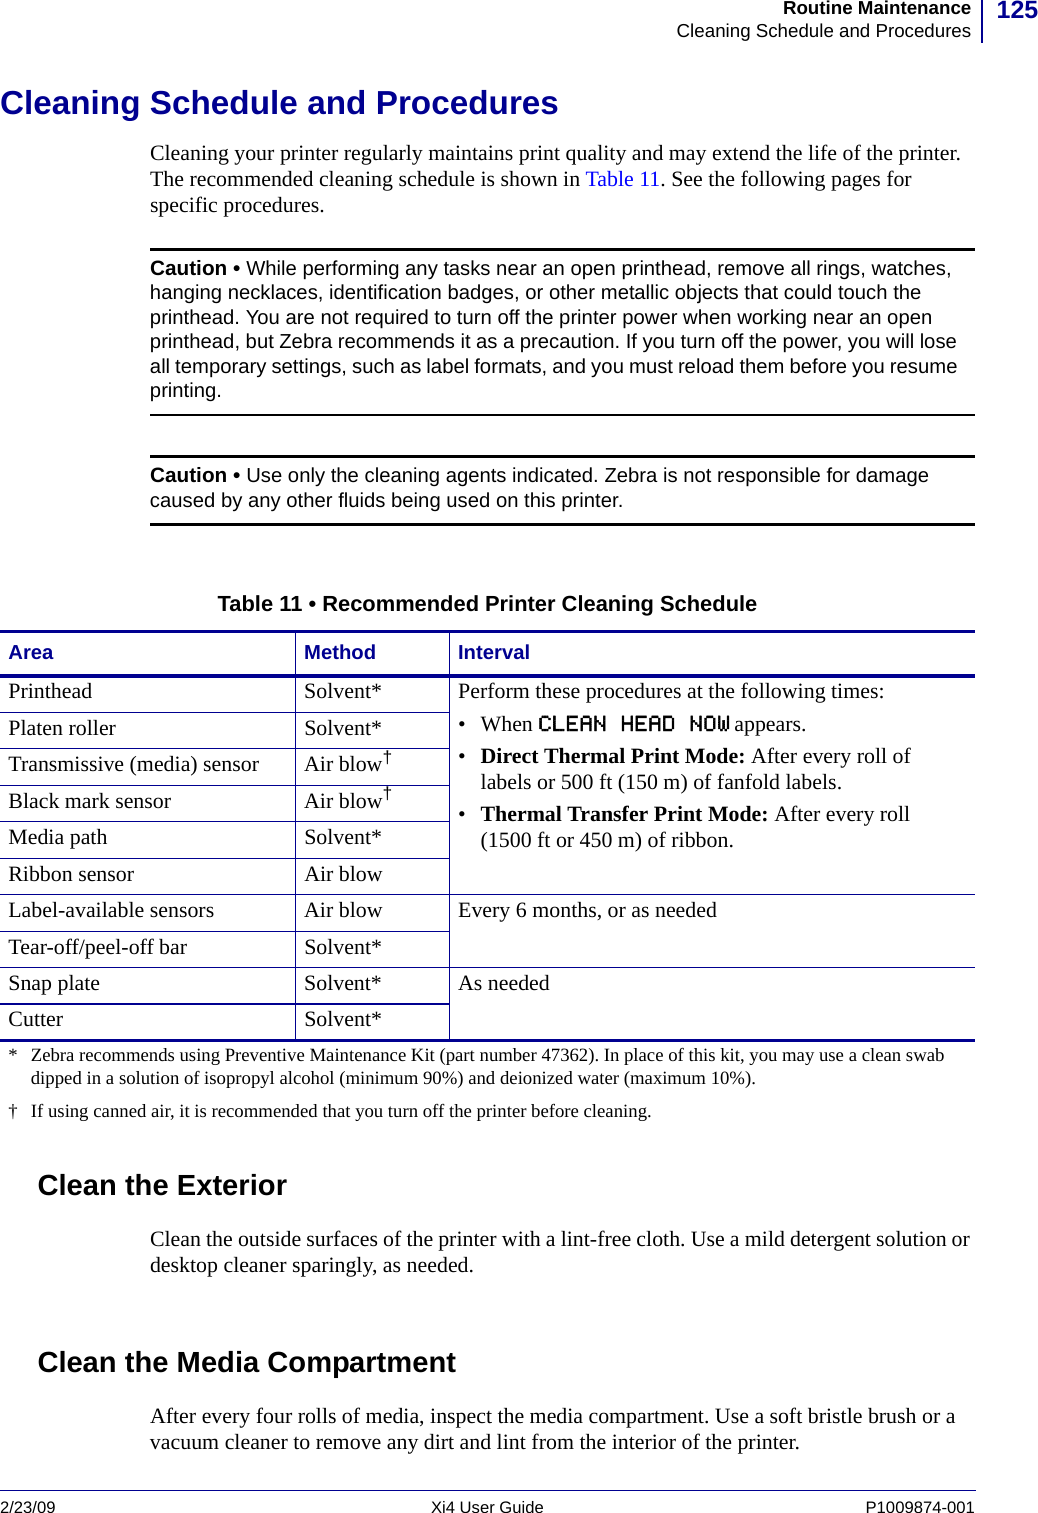 125Routine MaintenanceCleaning Schedule and Procedures2/23/09 Xi4 User Guide P1009874-001  Cleaning Schedule and ProceduresCleaning your printer regularly maintains print quality and may extend the life of the printer. The recommended cleaning schedule is shown in Table 11. See the following pages for specific procedures.Clean the ExteriorClean the outside surfaces of the printer with a lint-free cloth. Use a mild detergent solution or desktop cleaner sparingly, as needed.Clean the Media CompartmentAfter every four rolls of media, inspect the media compartment. Use a soft bristle brush or a vacuum cleaner to remove any dirt and lint from the interior of the printer.Caution • While performing any tasks near an open printhead, remove all rings, watches, hanging necklaces, identification badges, or other metallic objects that could touch the printhead. You are not required to turn off the printer power when working near an open printhead, but Zebra recommends it as a precaution. If you turn off the power, you will lose all temporary settings, such as label formats, and you must reload them before you resume printing.Caution • Use only the cleaning agents indicated. Zebra is not responsible for damage caused by any other fluids being used on this printer.Table 11 • Recommended Printer Cleaning ScheduleArea Method IntervalPrinthead Solvent* Perform these procedures at the following times:• When CLEAN HEAD NOW appears.•Direct Thermal Print Mode: After every roll of labels or 500 ft (150 m) of fanfold labels.•Thermal Transfer Print Mode: After every roll (1500 ft or 450 m) of ribbon.Platen roller Solvent*Transmissive (media) sensor Air blow†Black mark sensor Air blow†Media path Solvent*Ribbon sensor Air blowLabel-available sensors Air blow Every 6 months, or as neededTear-off/peel-off bar Solvent*Snap plate Solvent* As neededCutter Solvent** Zebra recommends using Preventive Maintenance Kit (part number 47362). In place of this kit, you may use a clean swab dipped in a solution of isopropyl alcohol (minimum 90%) and deionized water (maximum 10%).†  If using canned air, it is recommended that you turn off the printer before cleaning.